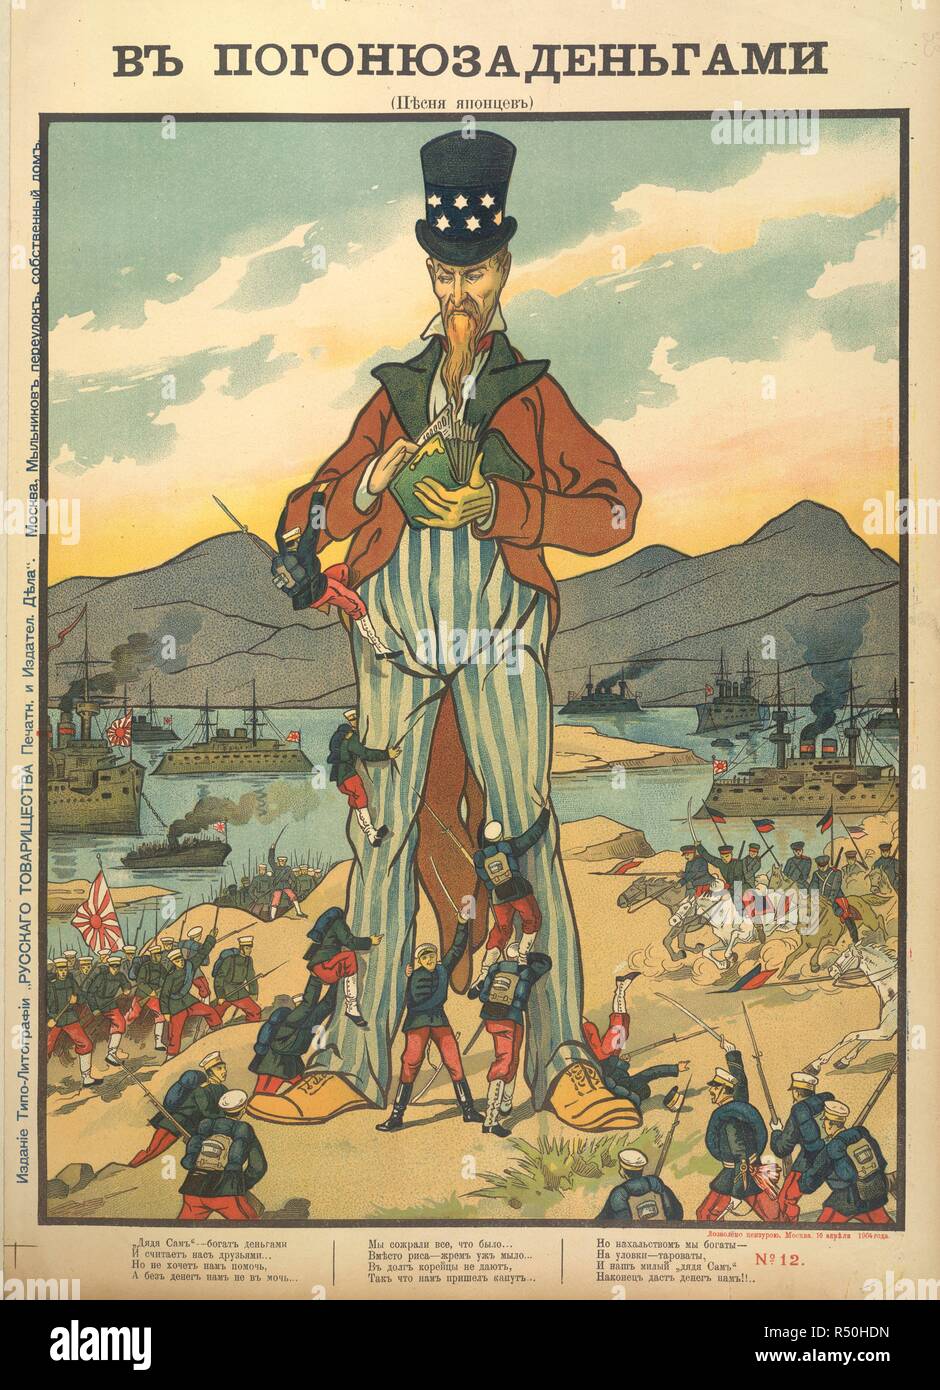 Pursuit for money'. A set of Russian cartoons on the Russo-Japanese wa.  Moscow and , 1904. Pursuit for money' (a Japanese song). A  satirical poem about the American support. Image taken from